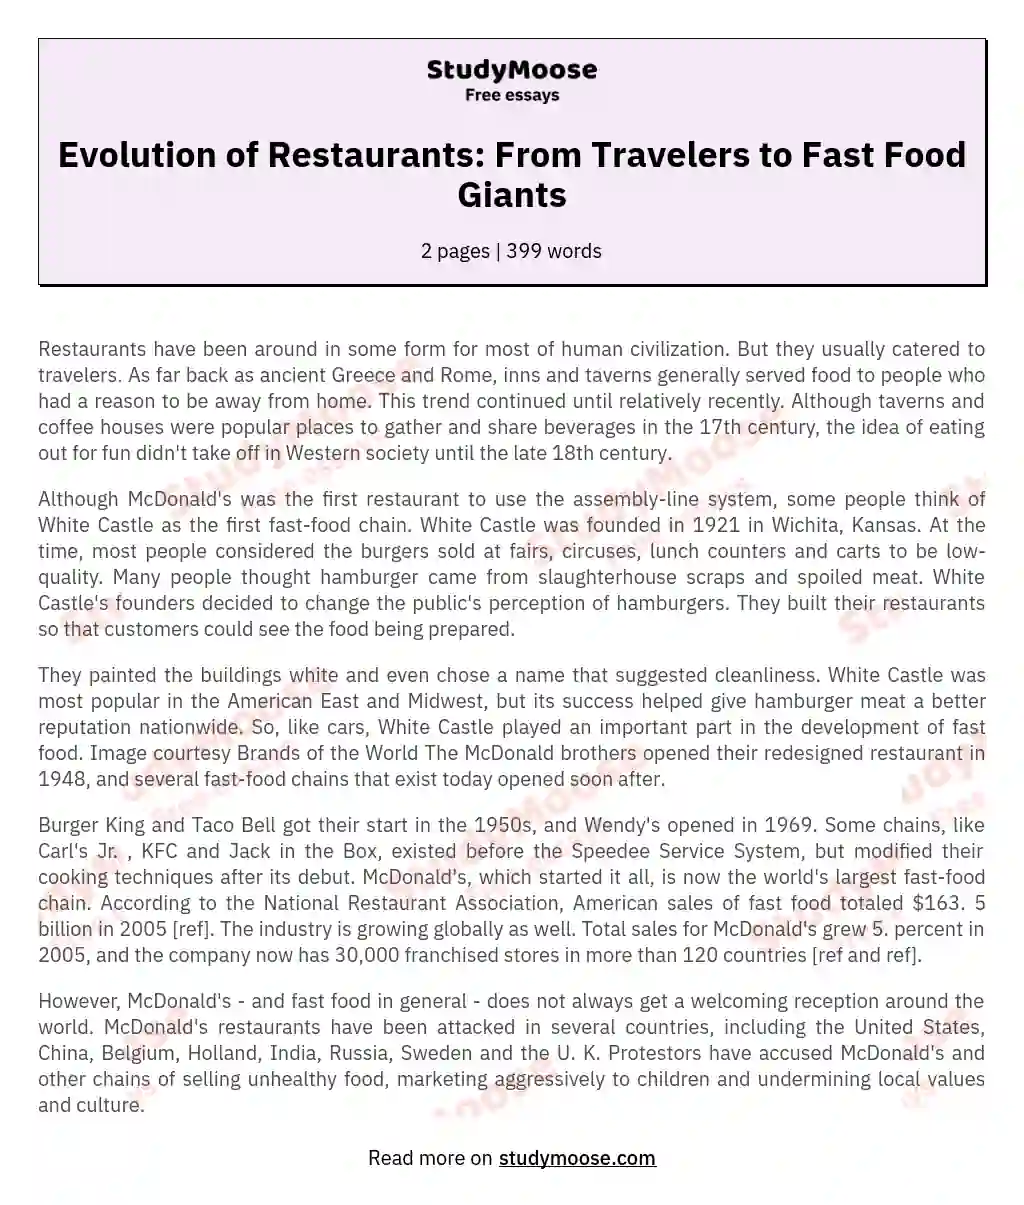 Evolution of Restaurants: From Travelers to Fast Food Giants essay